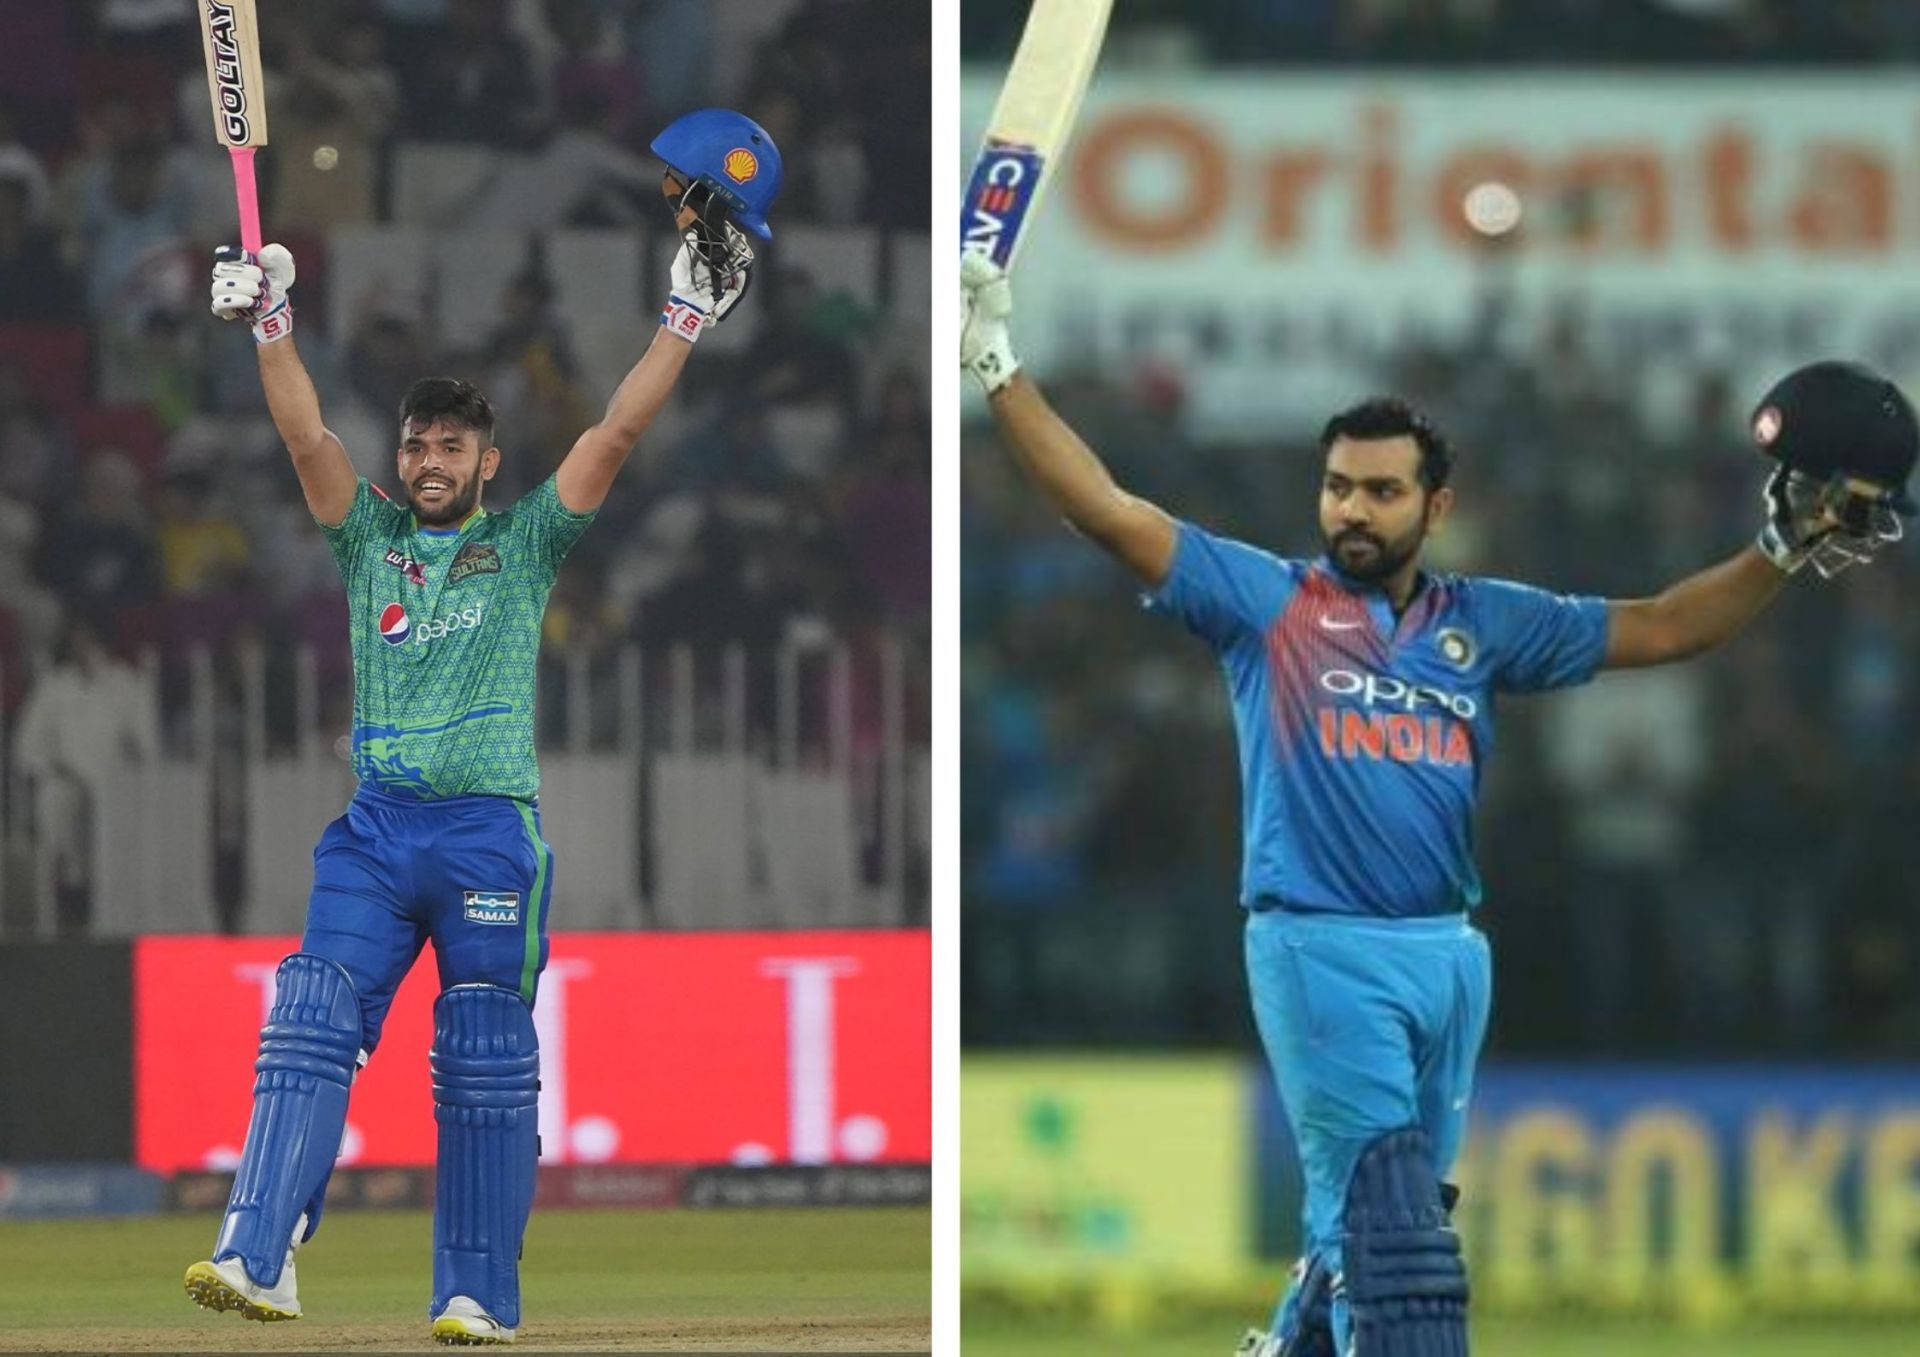 Not just Usman Khan, but Rohit Sharma threatened to score a T20 double-hundred once (Picture Credits: Twitter/ Multan Sultans; BCCI via Deccan Chronicle).